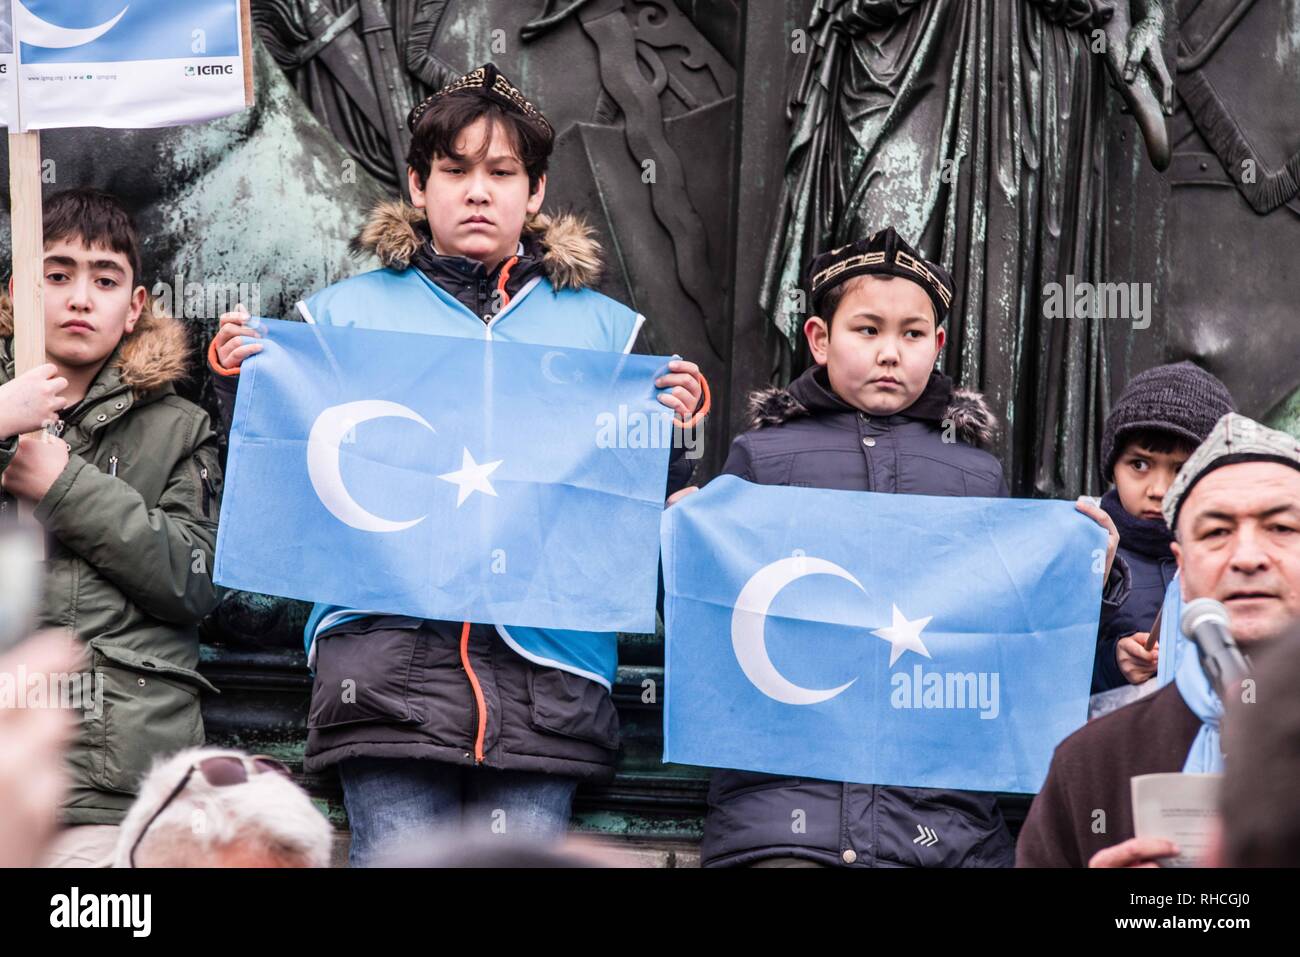 Munich, Bavaria, Germany. 2nd Feb, 2019. Uyghur children in Germany protesting with the flag of East Turkestan, which is also known as the Xinjiang Autonomous Province. to protest against the so-called 'Muslim Crackdown'' by the Chinese Communist Party in the Xinjiang Autonomous Region of China. The region is contains roughly 26 million people, 11 million of whom are the ethnically Turkic Uyghurs who still call the region East Turkistan . The CCP has placed upwards of 1 million Uyghurs in reeducation ca Credit: ZU Credit: ZUMA Press, Inc./Alamy Live News Stock Photo